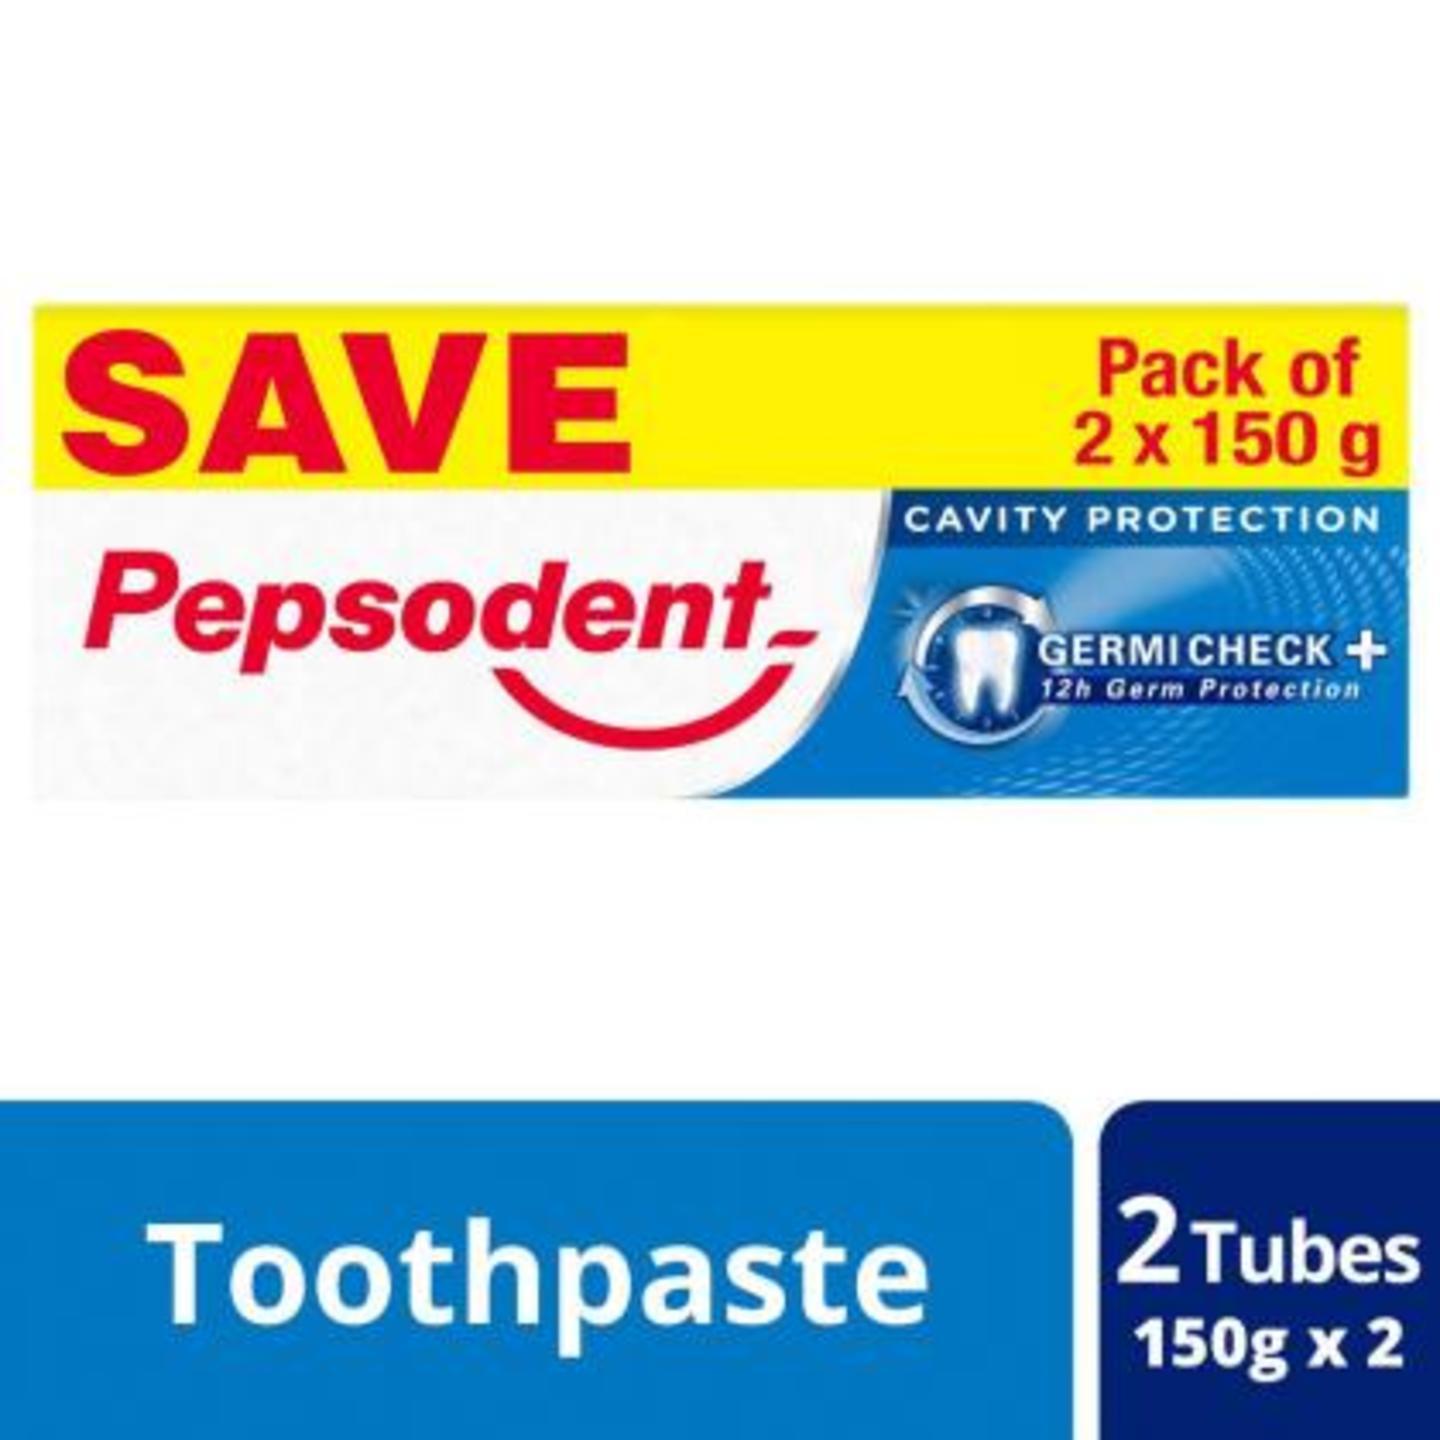 Pepsodent Germicheck+ Cavity Protection Toothpaste 150 g (Pack of 2) PM/BM 0.1/12